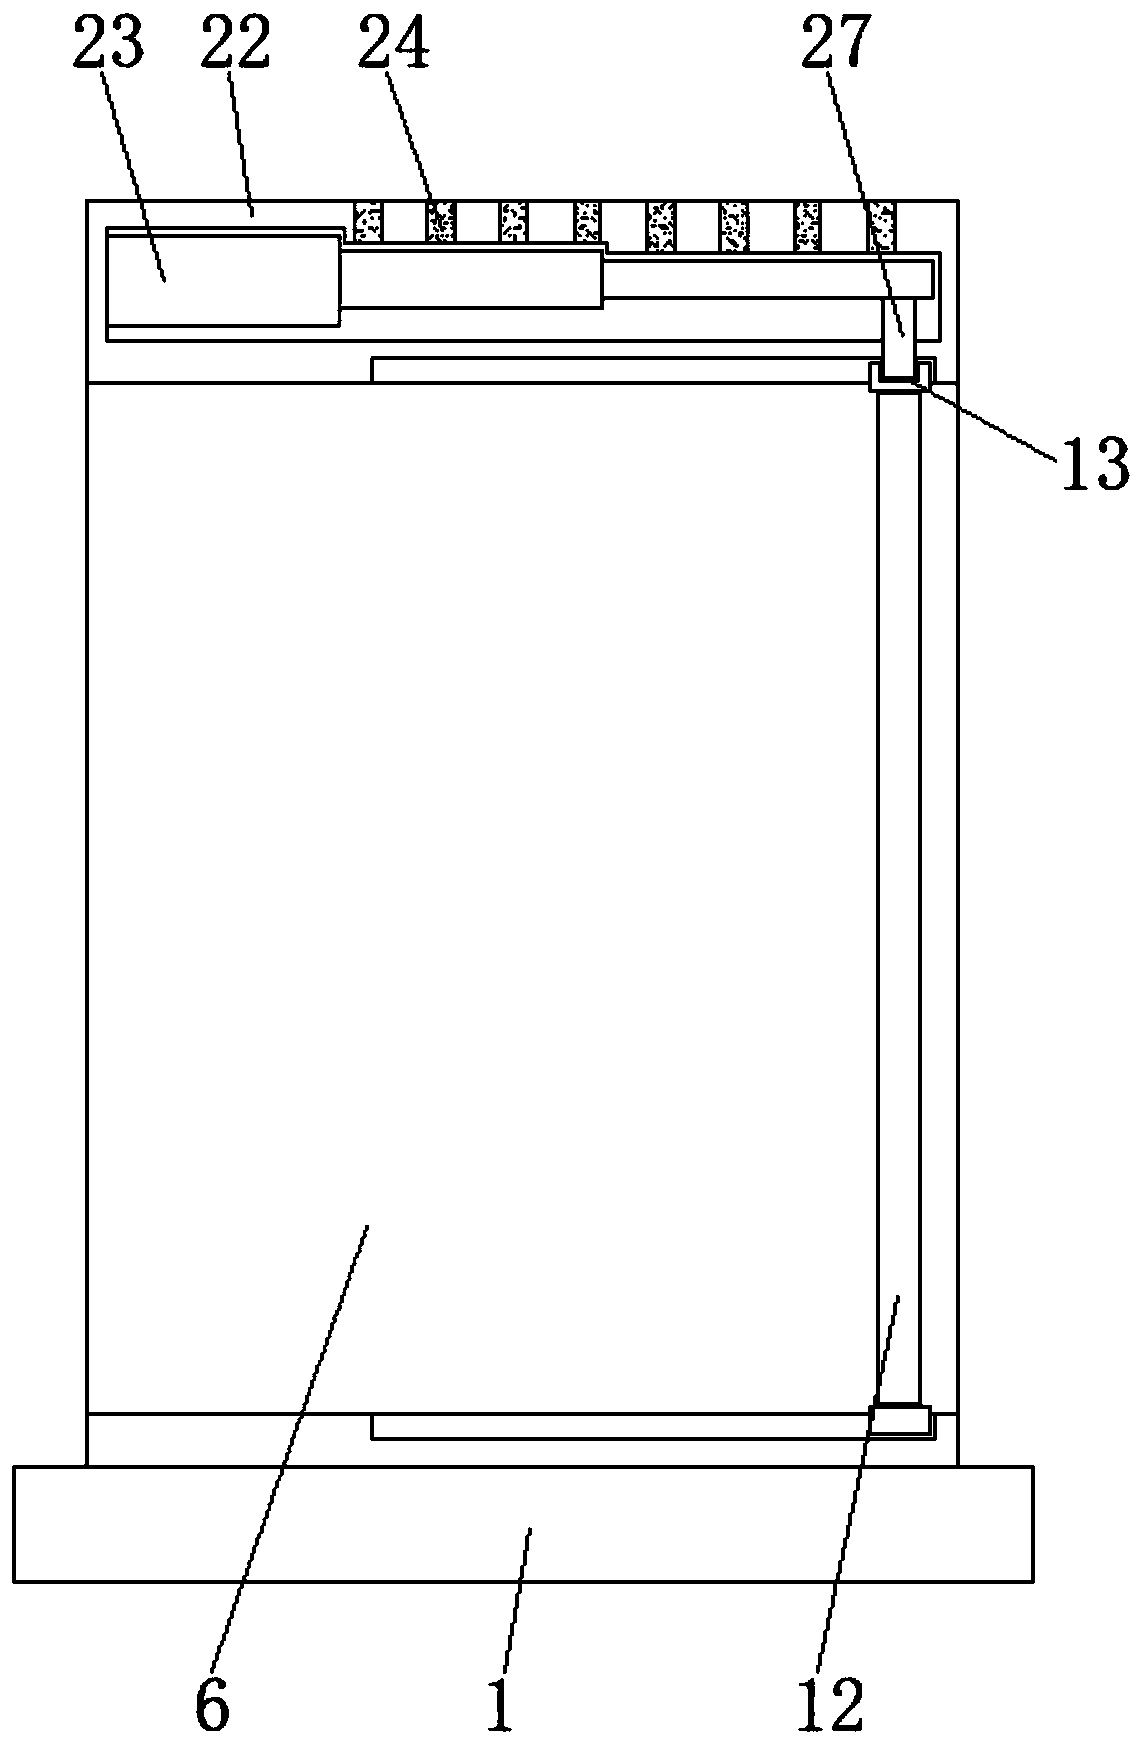 Front-rear double-door type electrical cabinet convenient to overhaul and high in stability